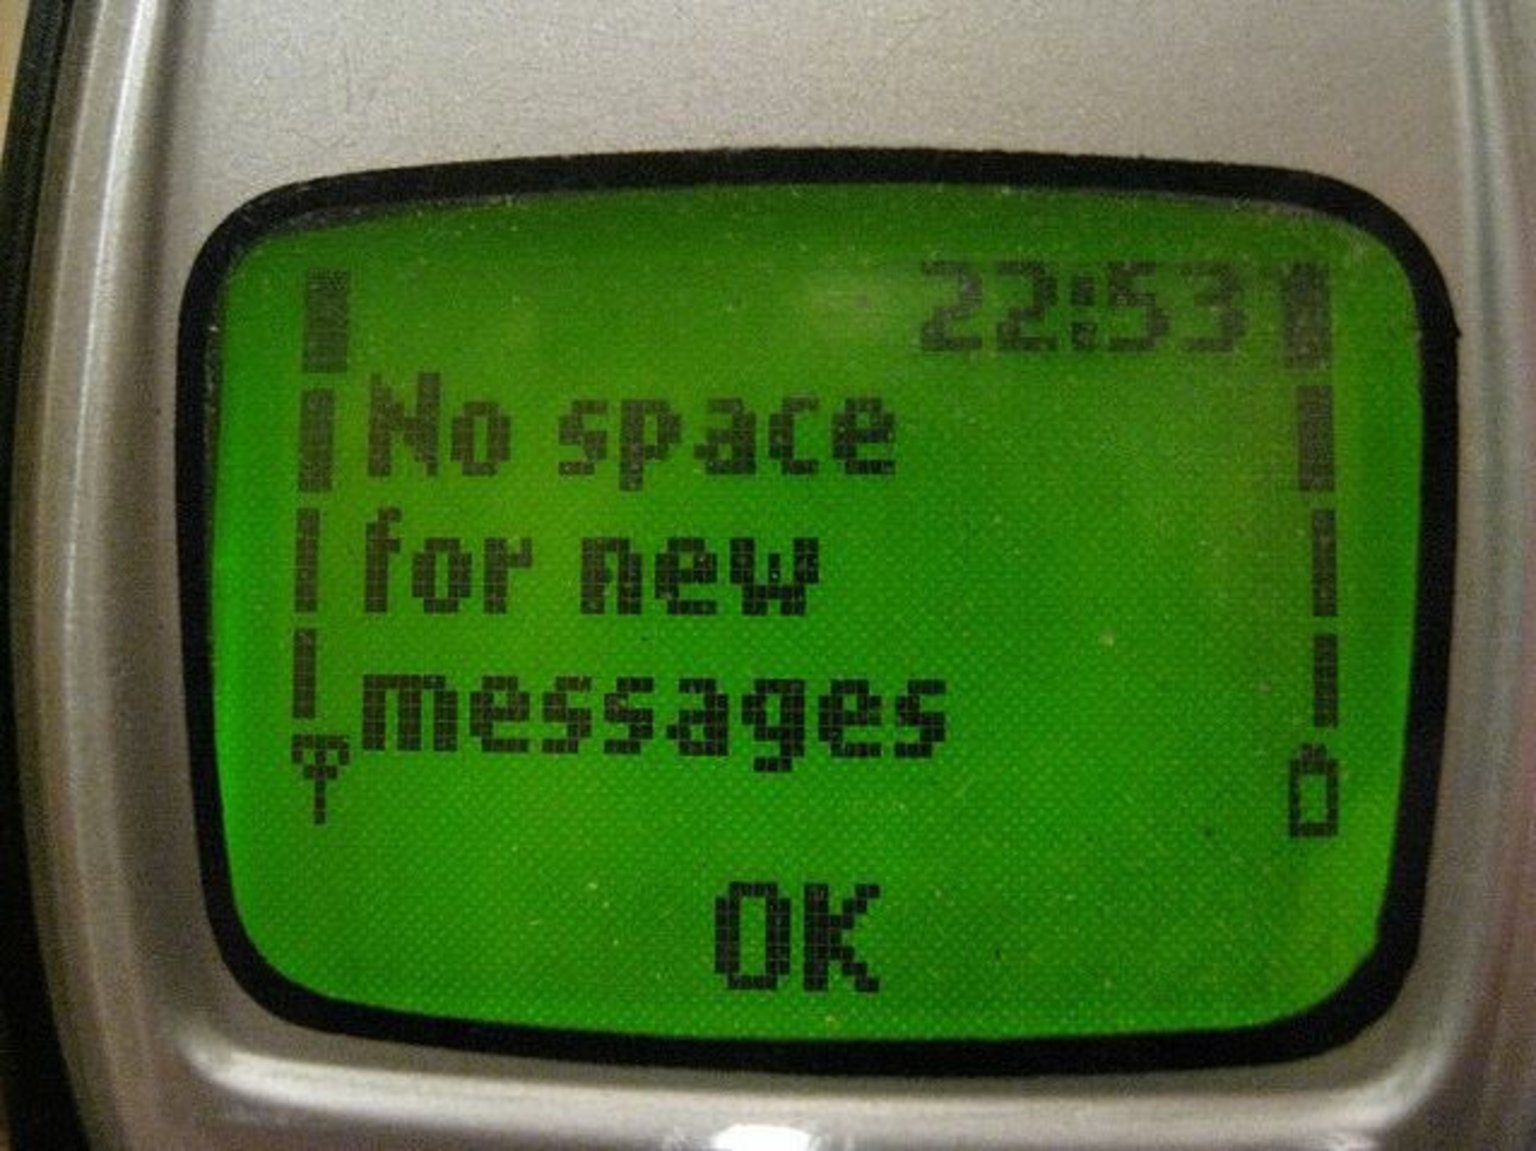 1 new message. Nokia no Space for New messages. No Space for New messages.